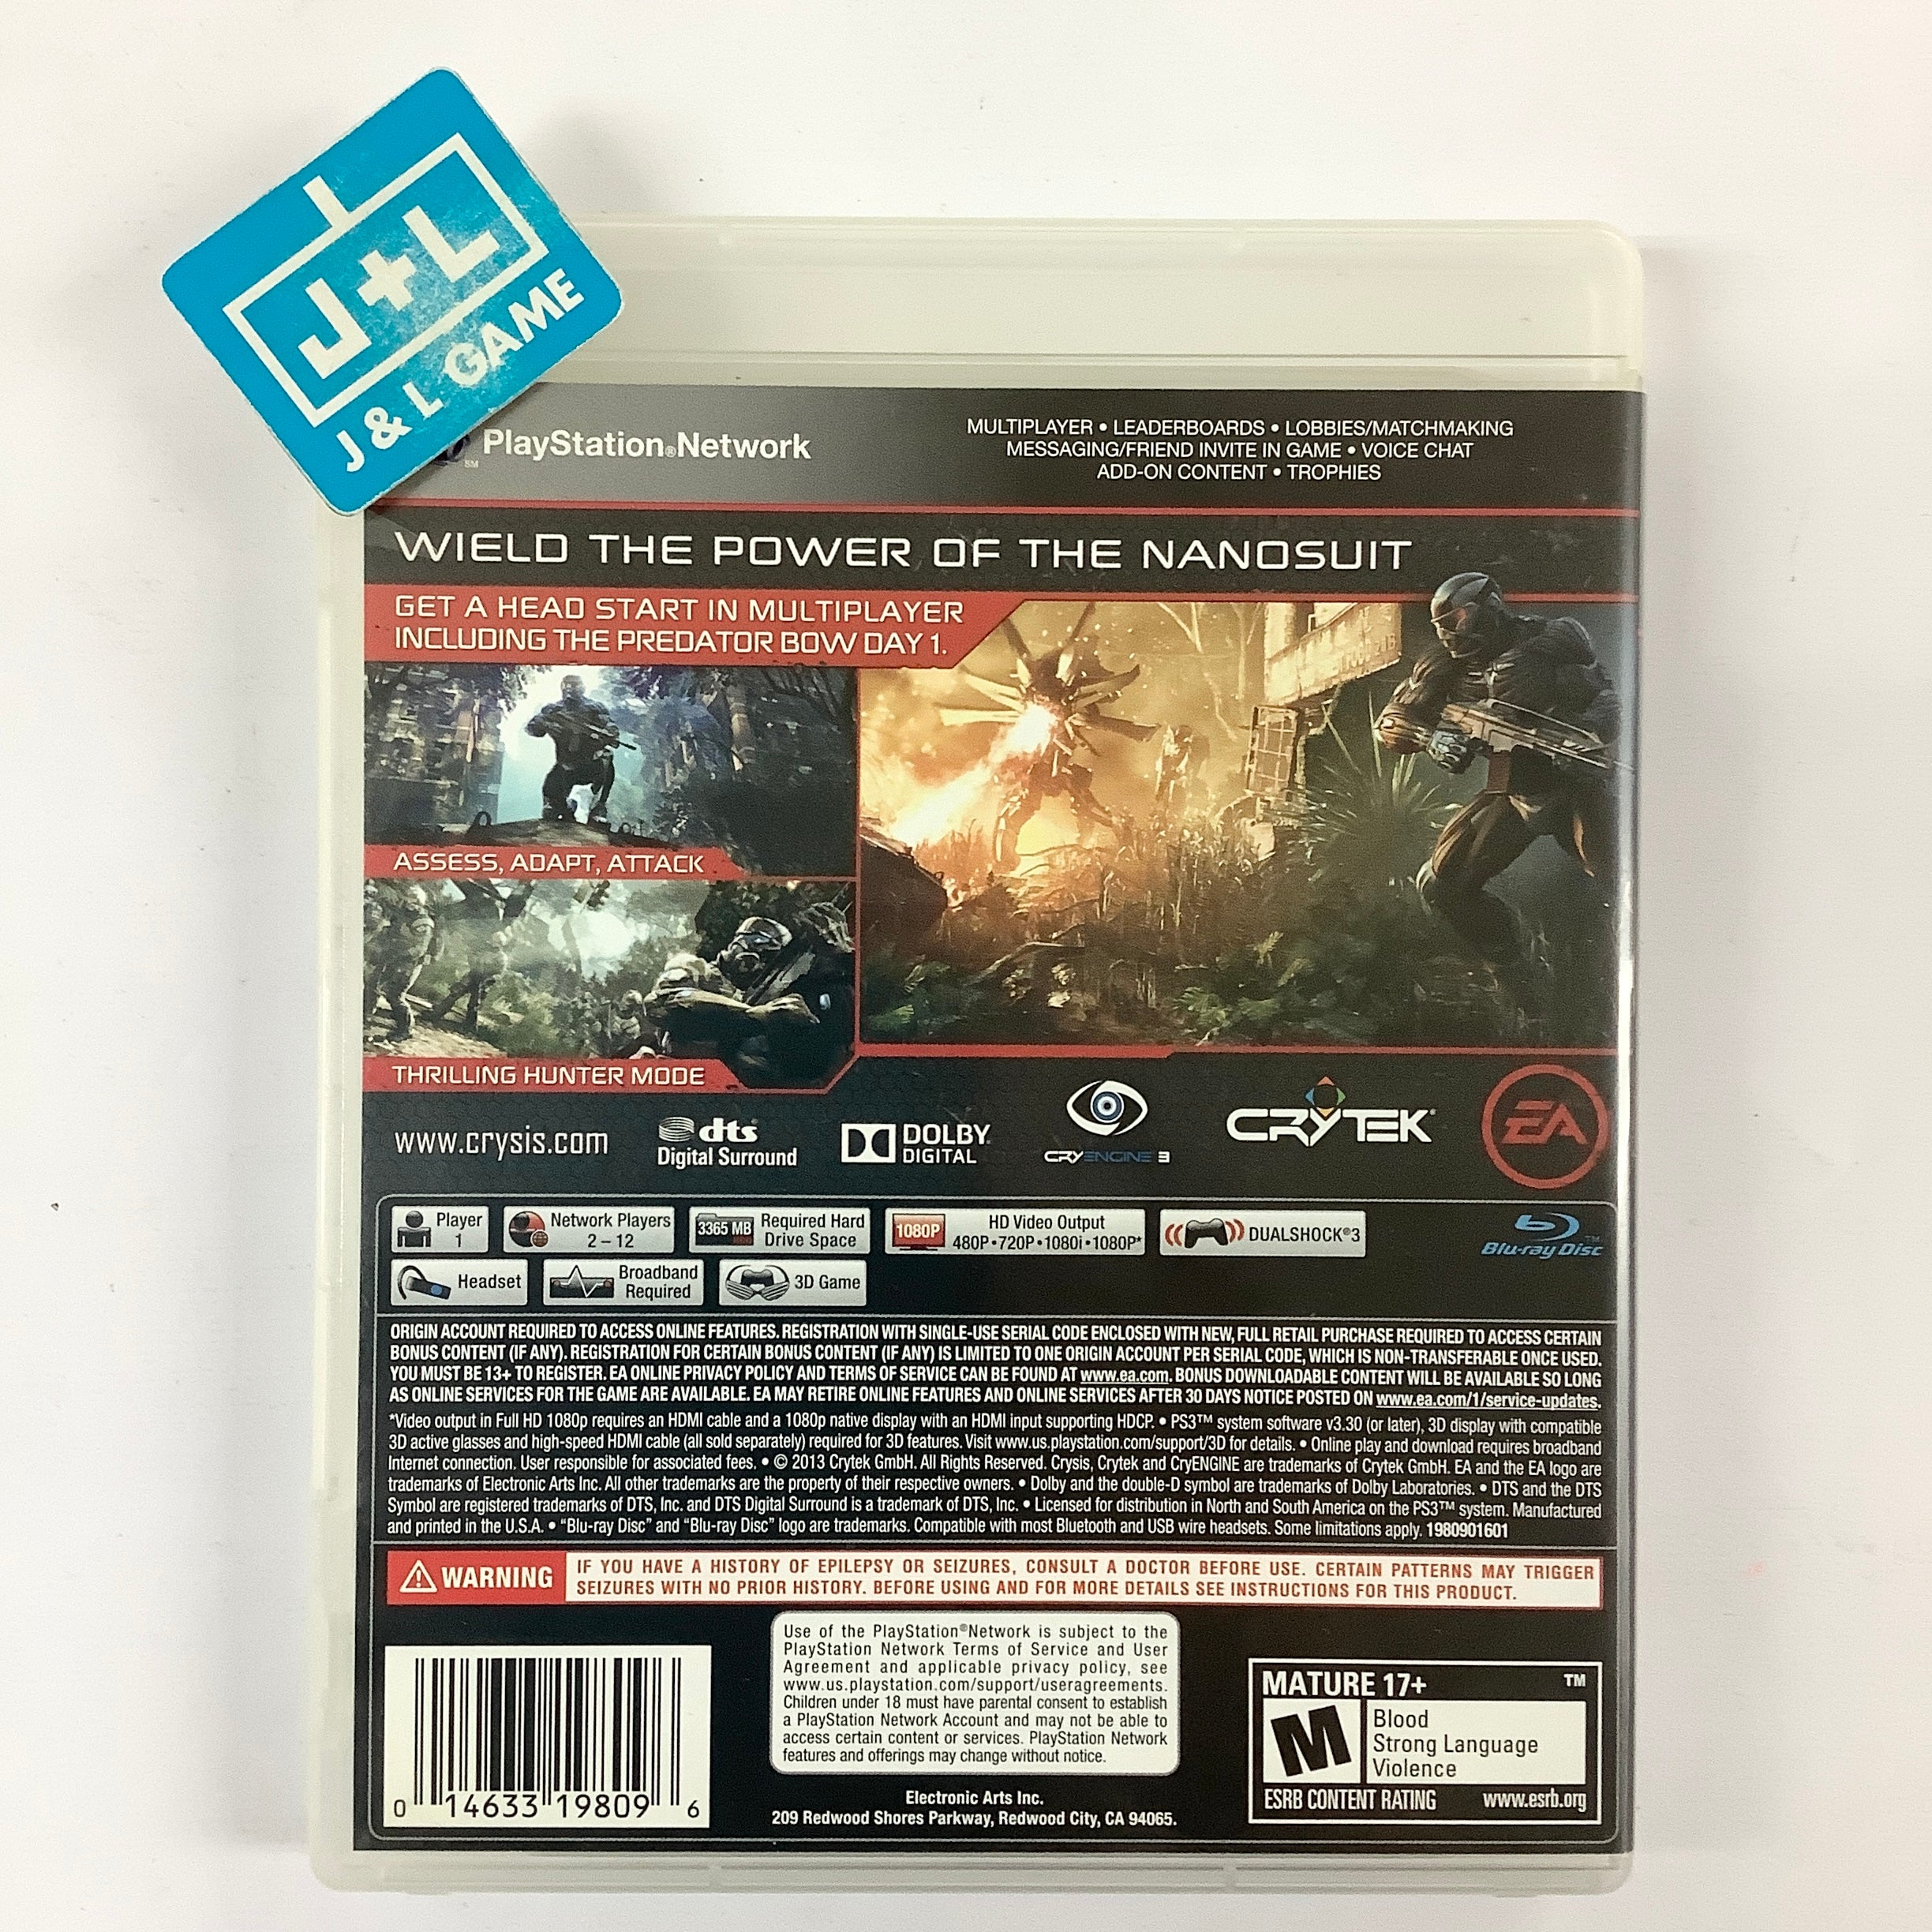 Crysis 3 (Hunter Edition) - (PS3) PlayStation 3 [Pre-Owned] Video Games EA Games   